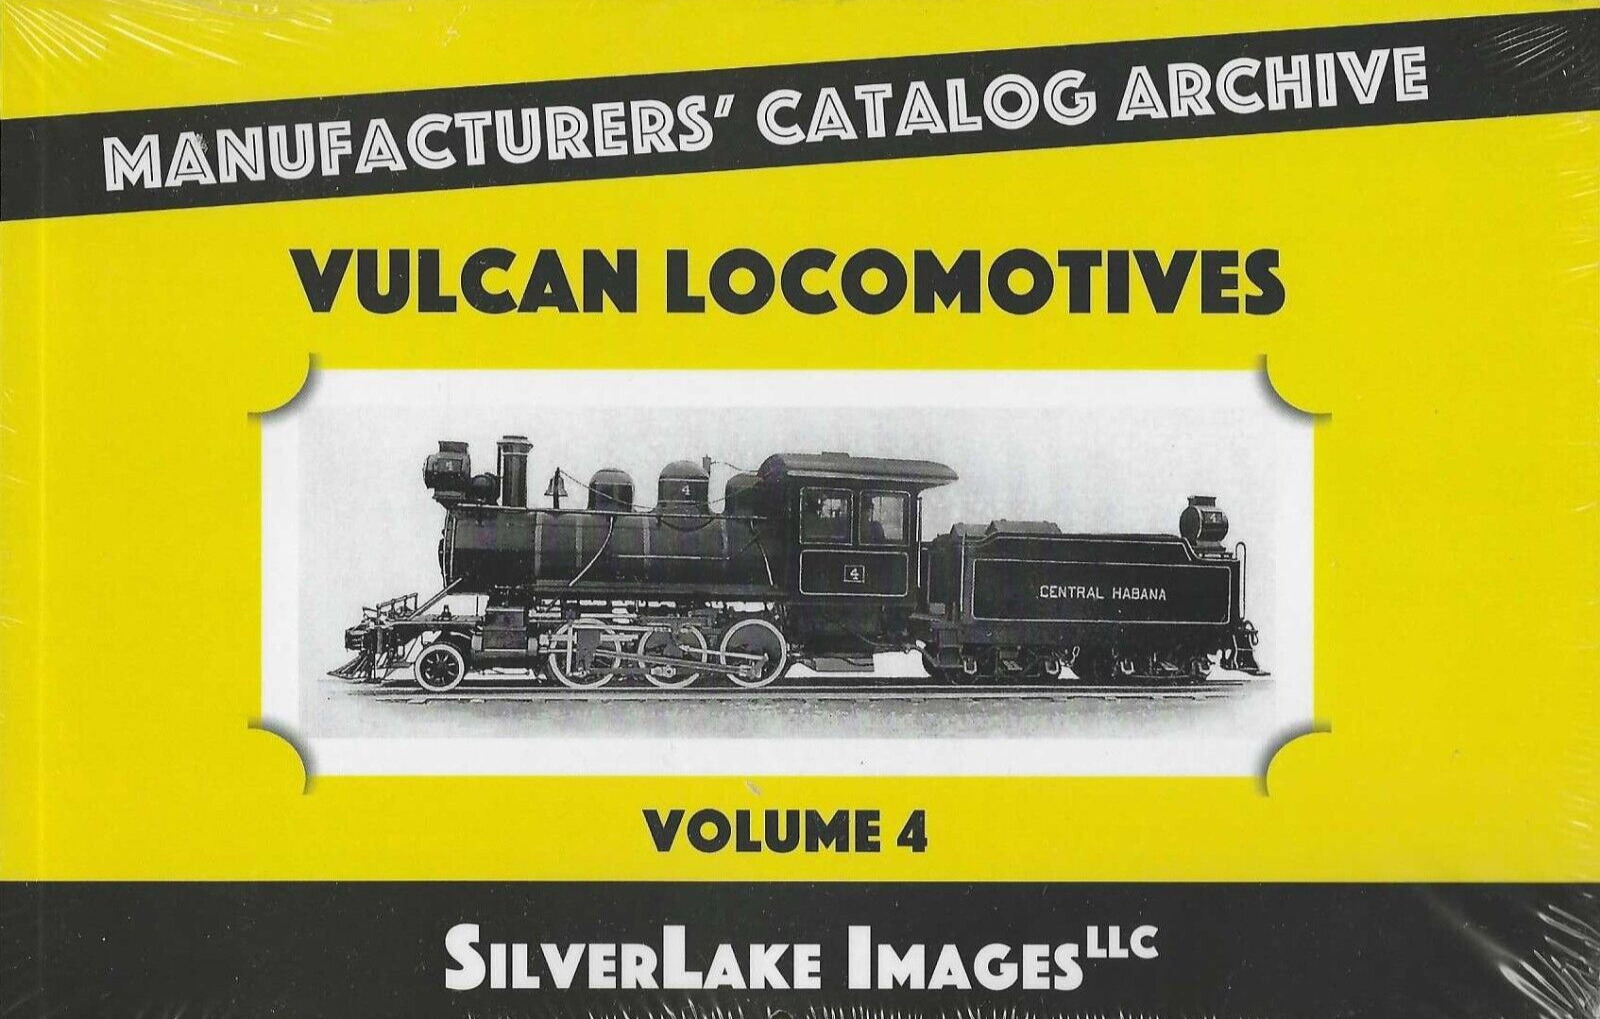 VULCAN Locomotives, Vol. 4 from Manufacturers\' Catalog Archive (BRAND NEW BOOK)